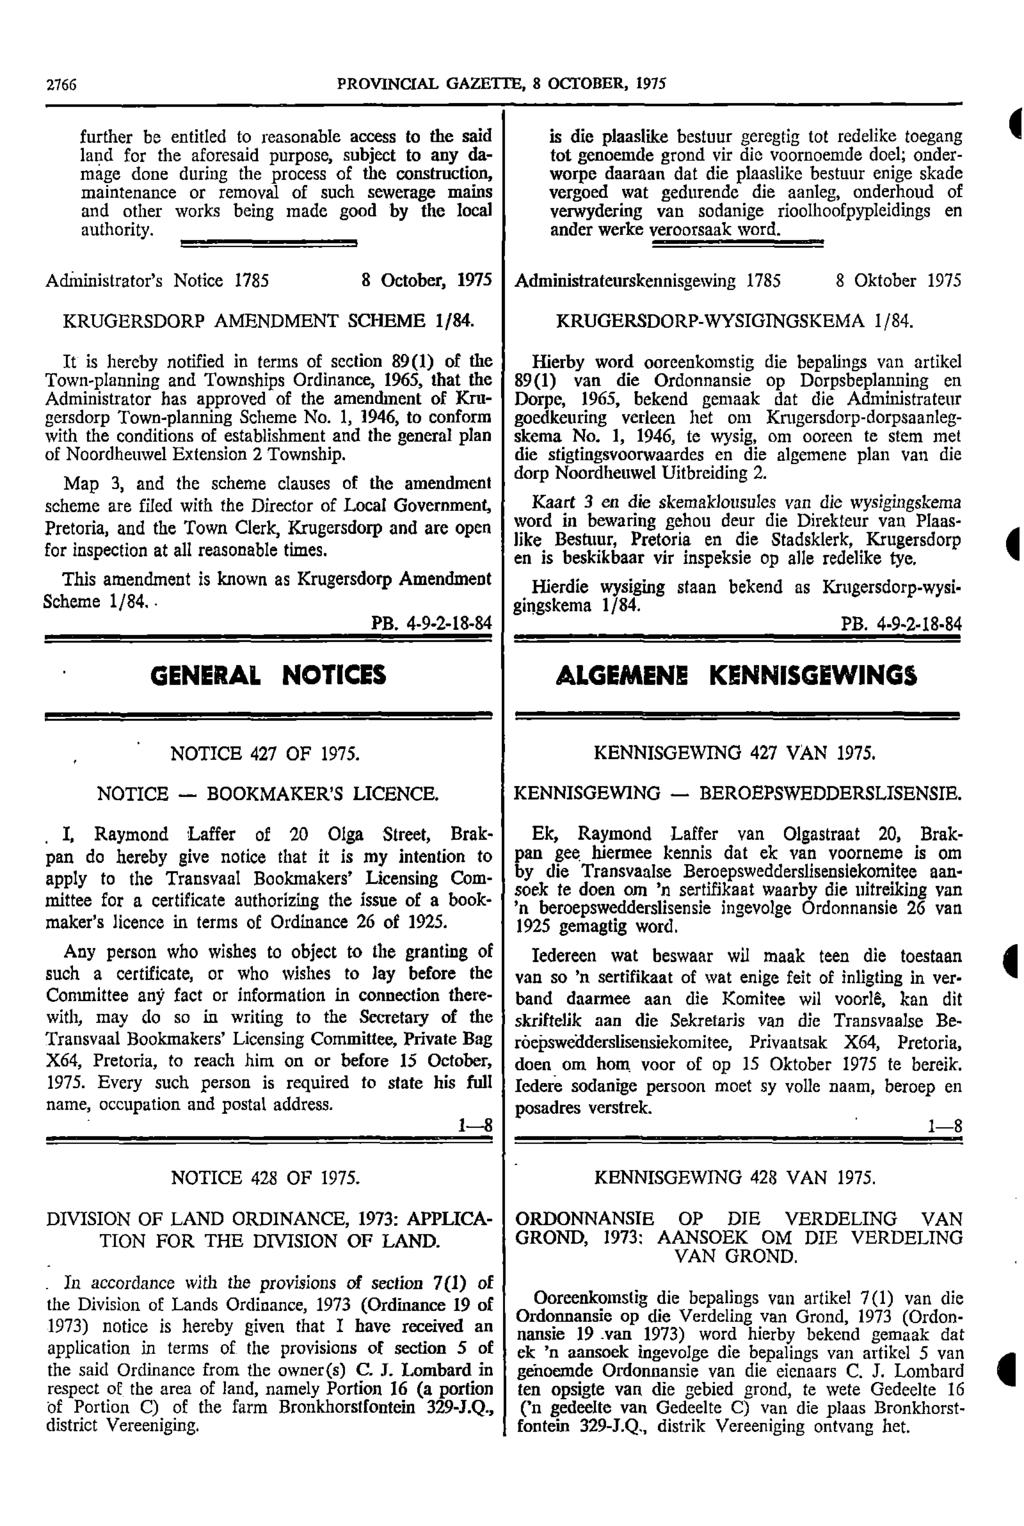 2766 PROVNCAL GAZETTE 8 OCTOBER 1975 further be entitled to reasonable access to the said is die plaaslike bestuur geregtig tot redelike toegang land for the aforesaid purpose subject to any da tot